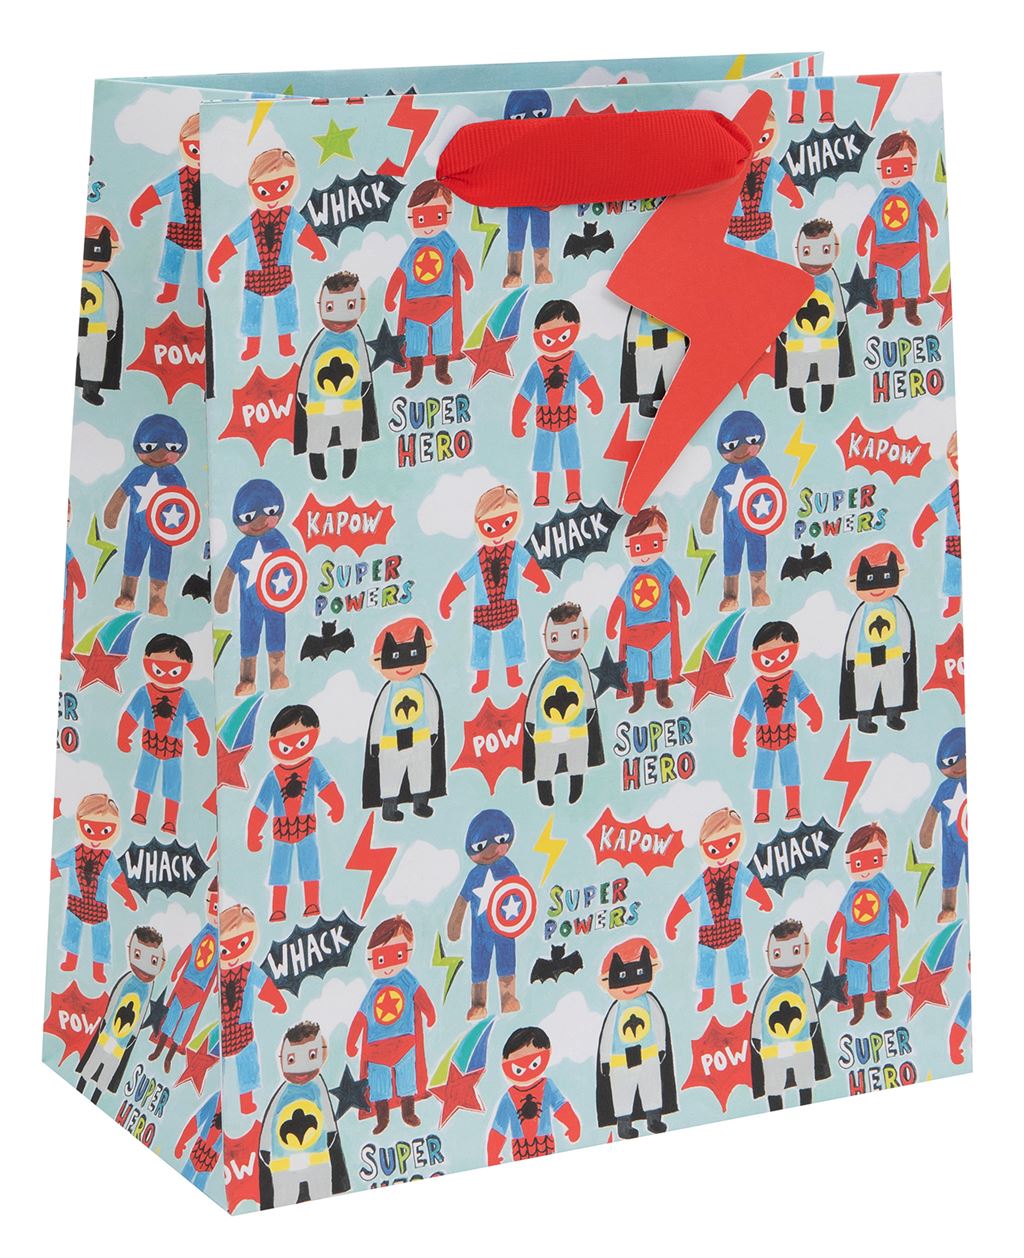 A gift bag with a light blue background covered in superhero illustrations. Little boys are dressed as Captain America, Batman and Spiderman feature. There are also embellishments in the background of white clouds, red thunderbolts and phrases such as &#39;whack&#39;, &#39;pow&#39; and &#39;kapow&#39;. There is also a red ribbon handle with a red thunderbolt gift tag.